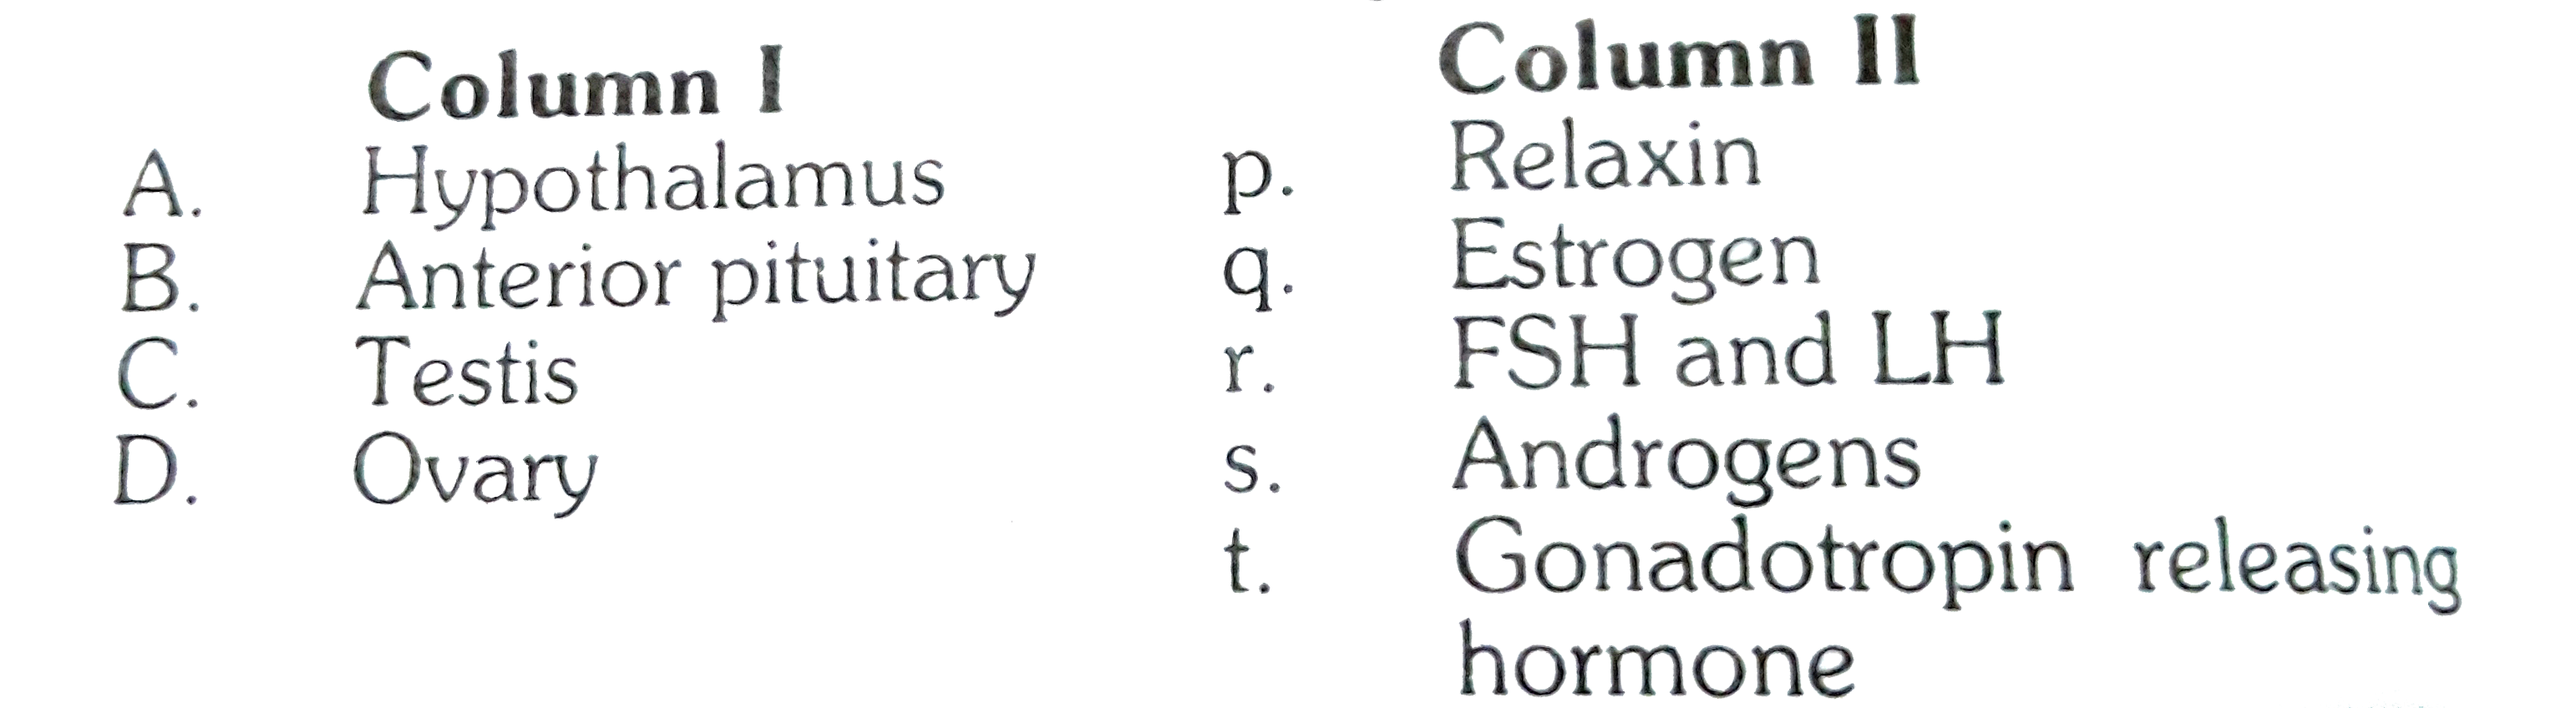 Column I lists the endocrine structure and column II lists the corresponding hormones. Match the two columns. Identify the correct option from those given